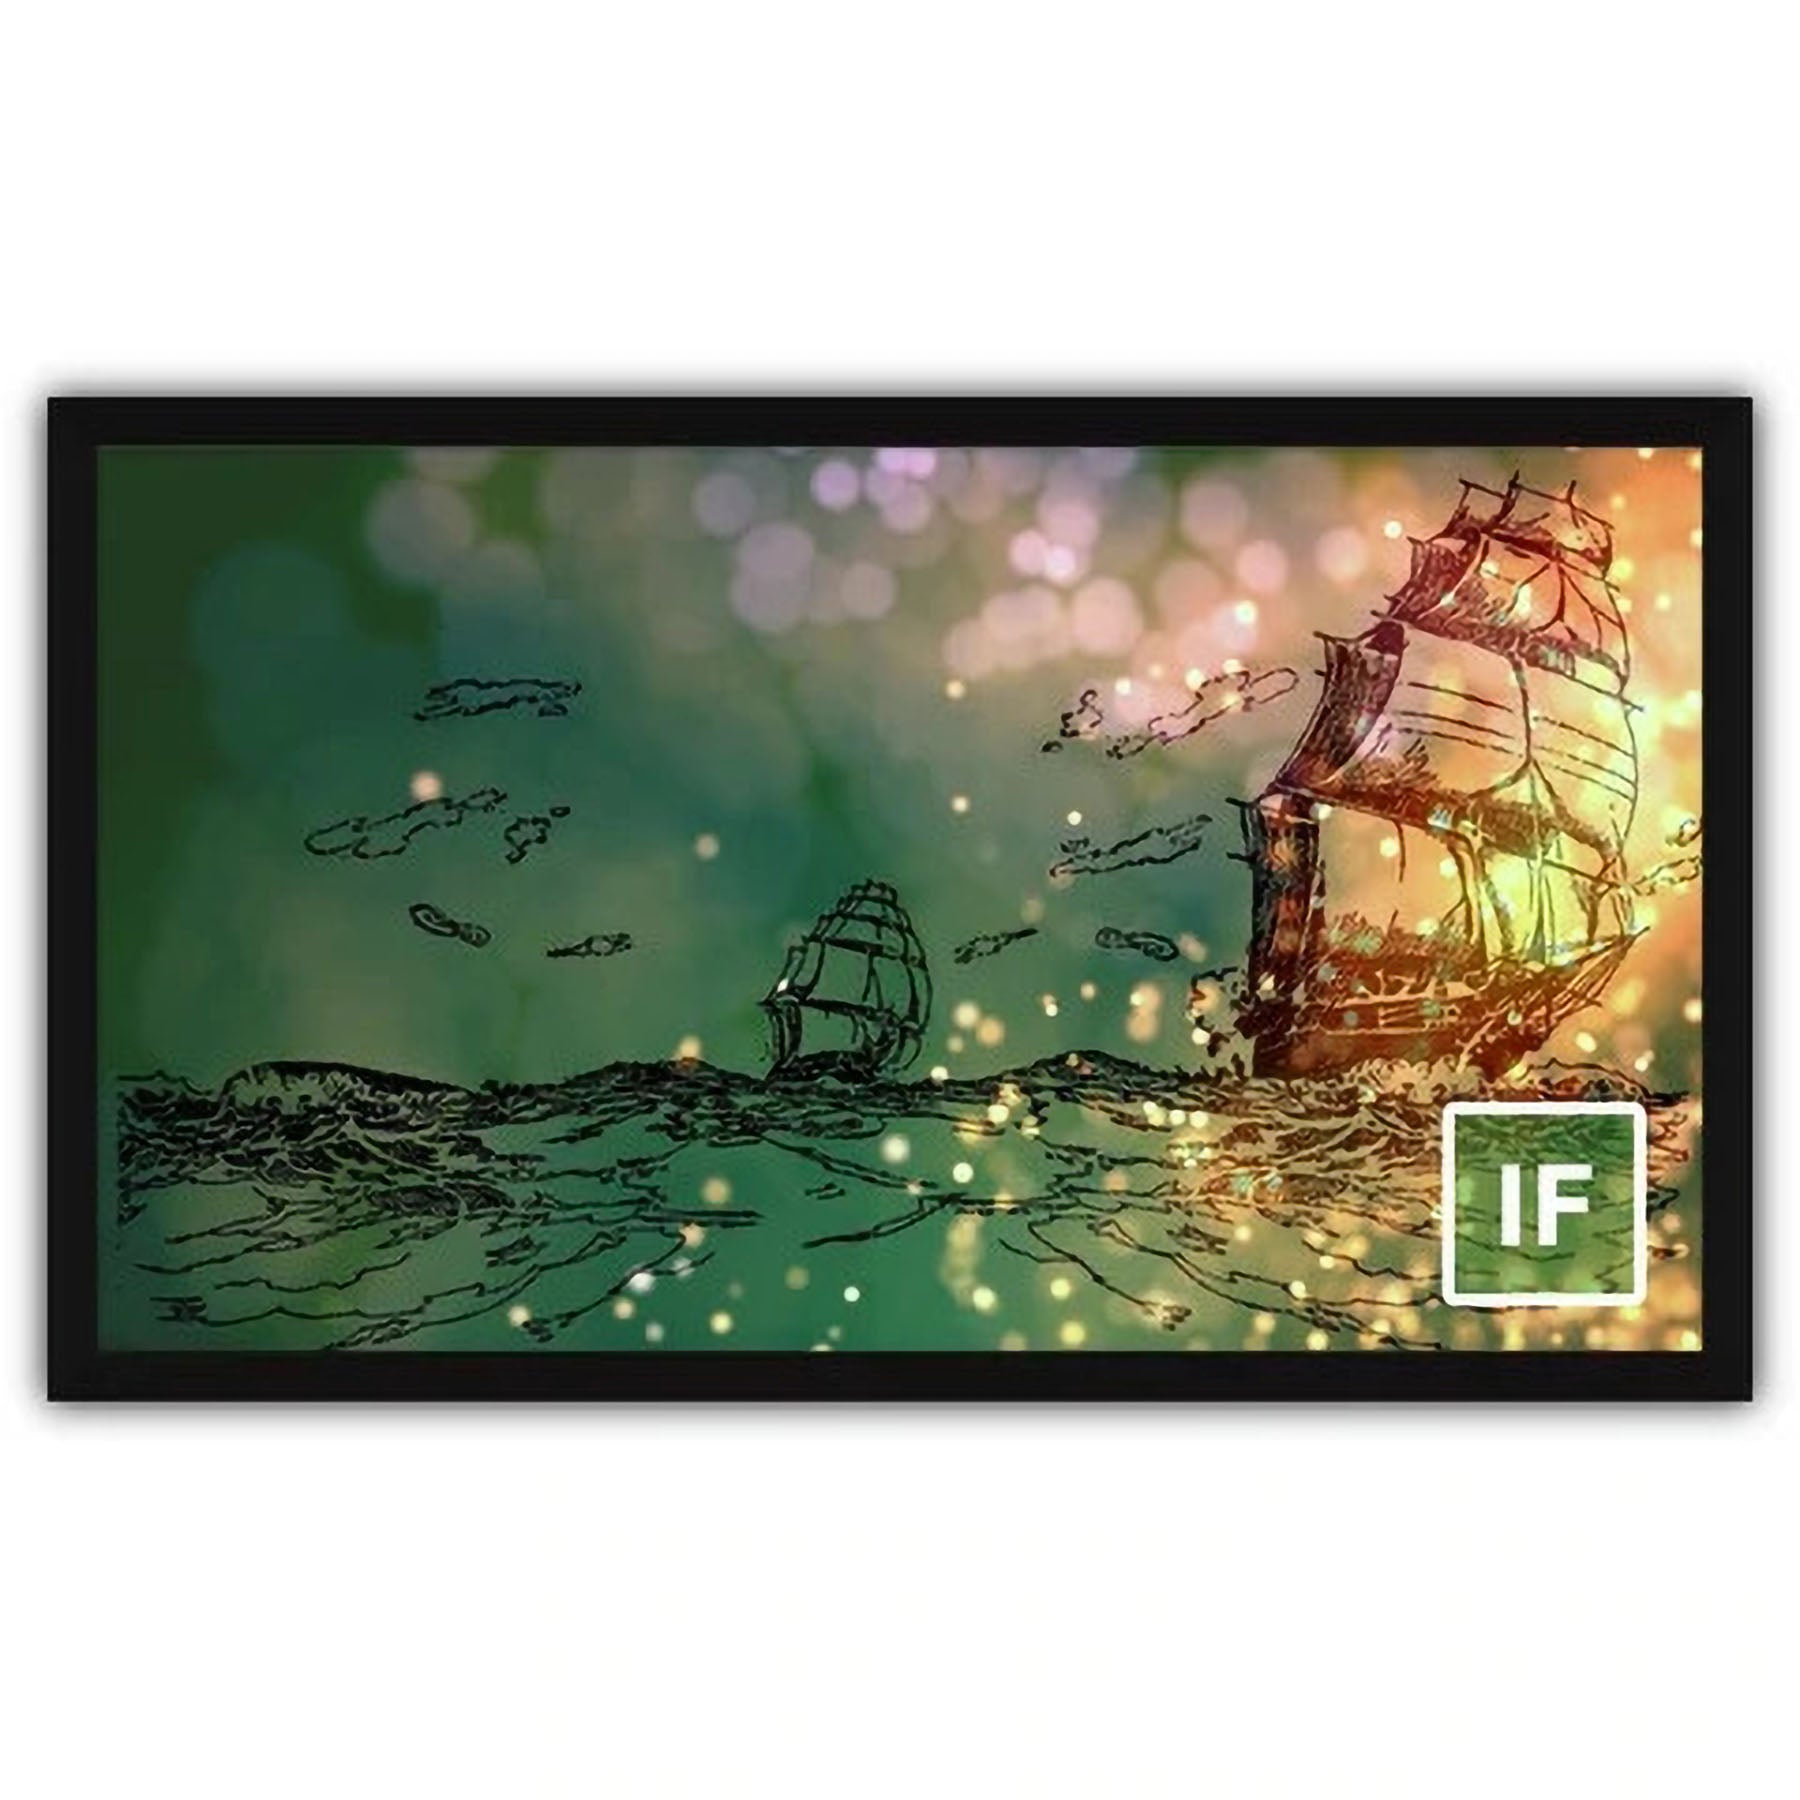 Severtson Screens Impression Series 16:9 100-inch Fixed Frame Projection Screen